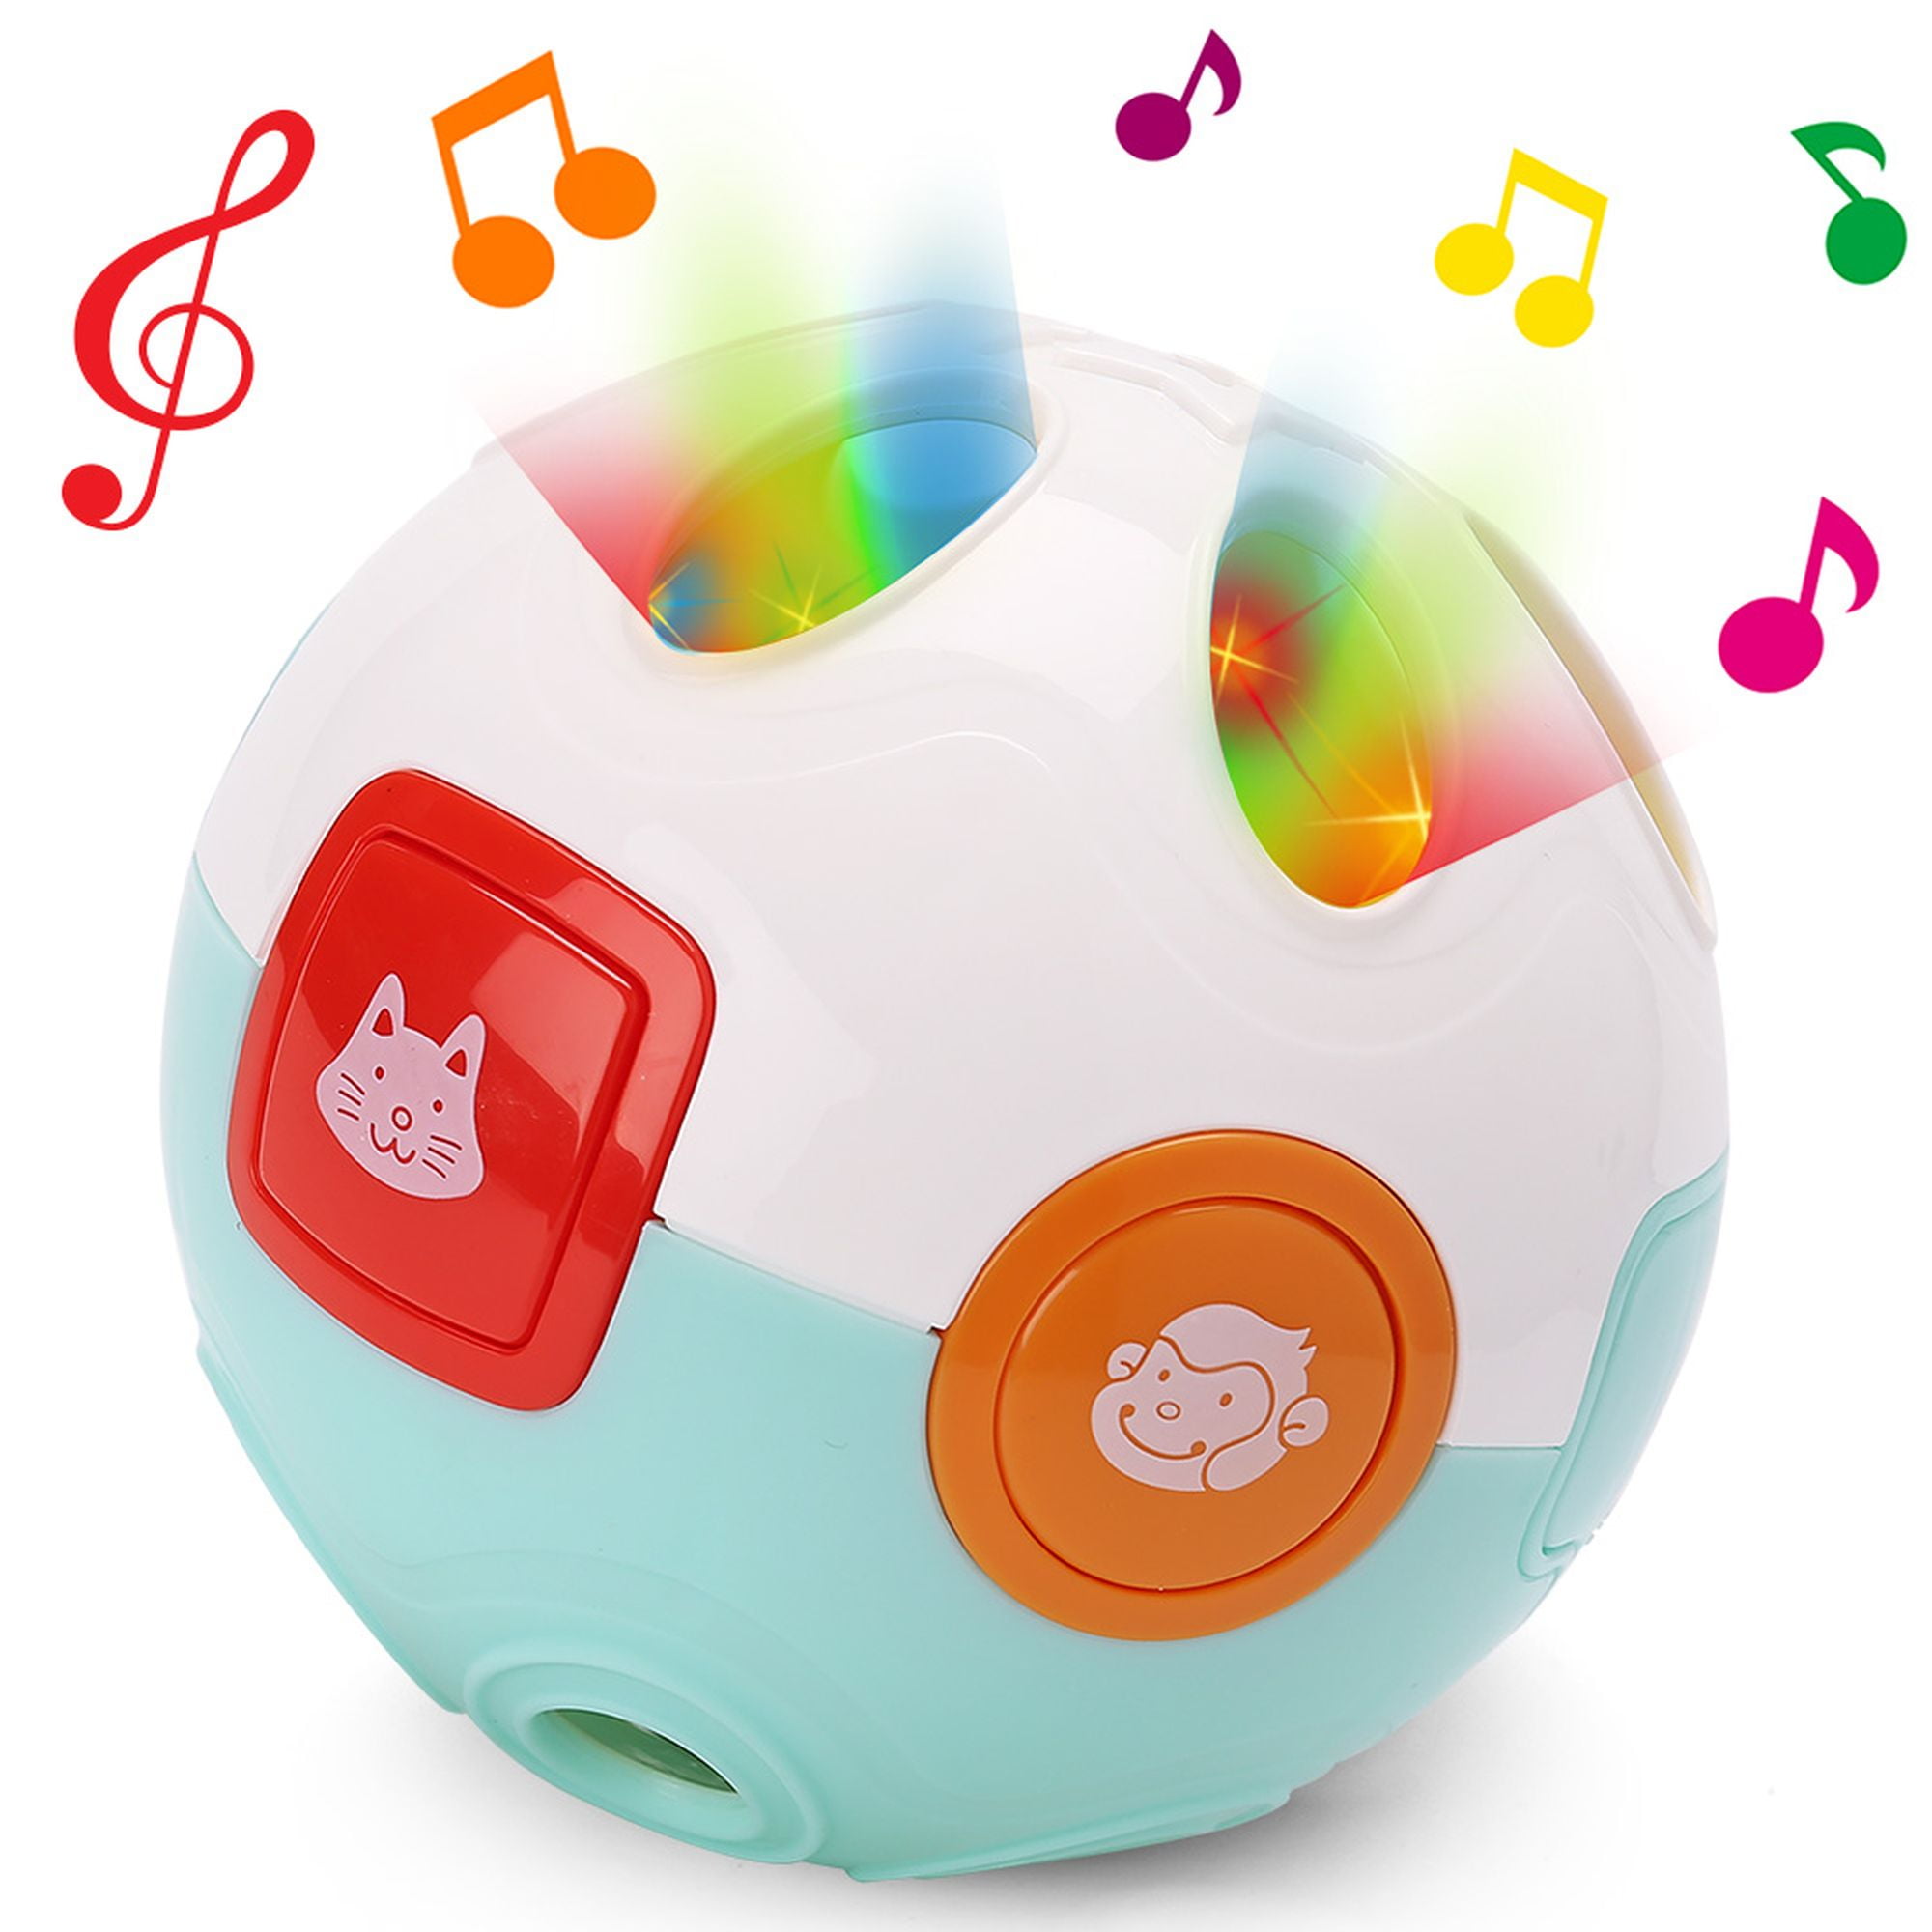 LotFancy Baby Musical Crawling Learning Ball, 5in Interactive Baby Ball Toy for Toddlers, Infant - Walmart.com